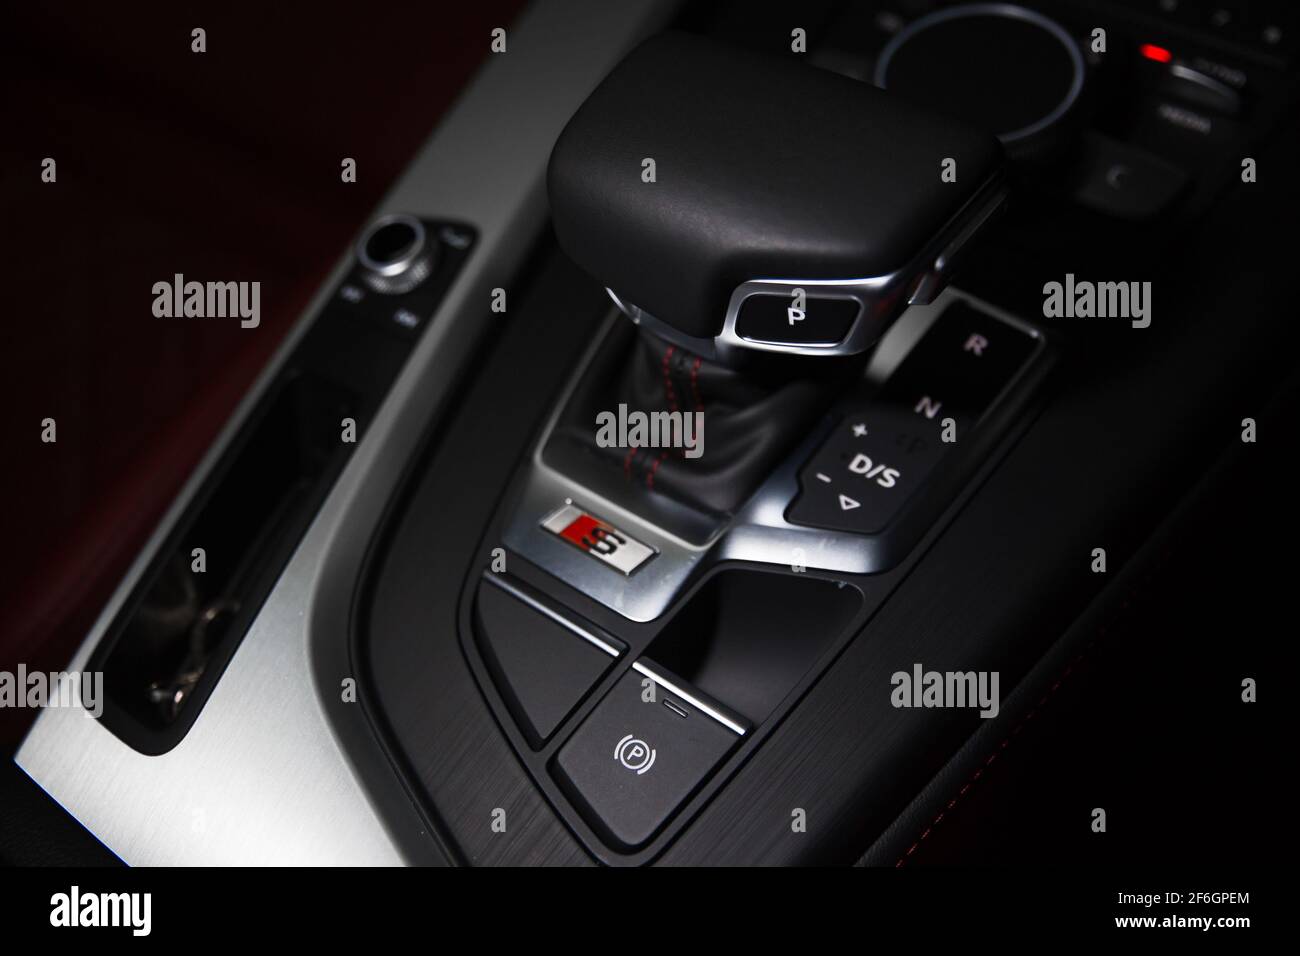 A 2018 Audi S4 With Aluminum inserts And Black Leather Automatic Gear Stick Stock Photo